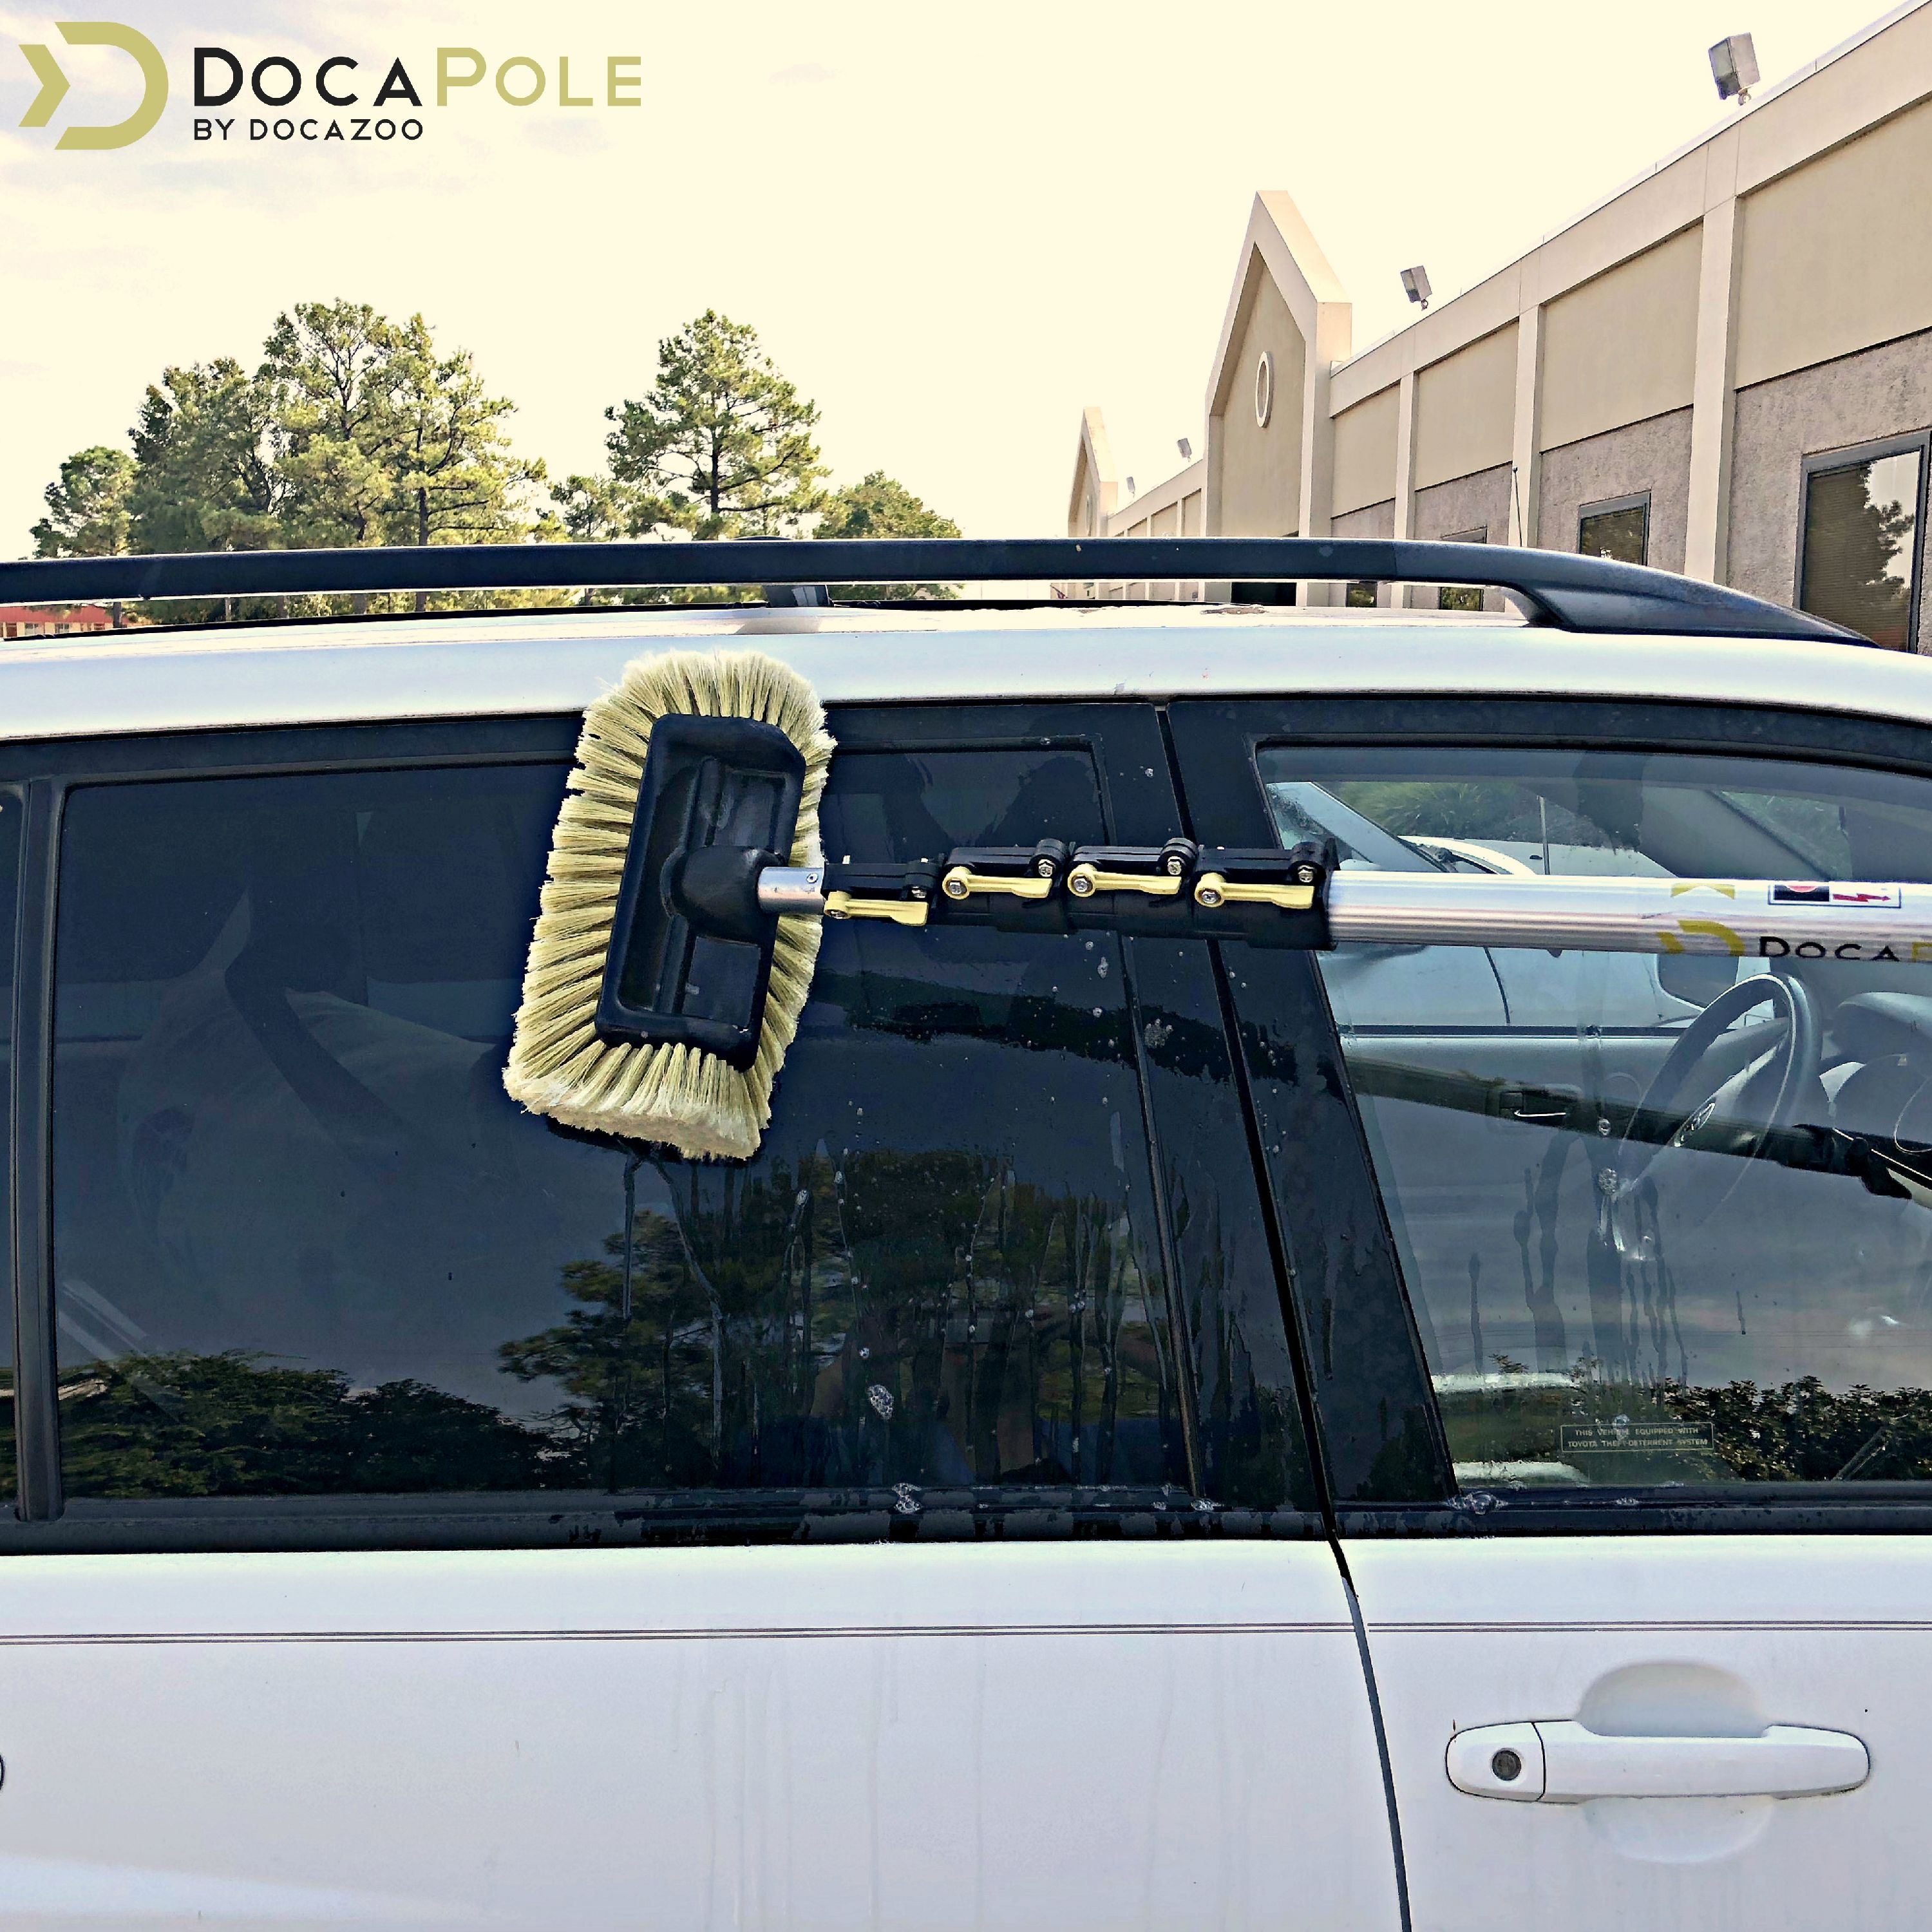 DocaPole 6-24' Soft Bristle Car Wash Brush & Extension Pole |11" Scrub Brush with 12 Foot Handle | Long-Reach Cleaning Brush and Deck Brush for Car, Truck, Boat, RV, House Siding, Floor, and More - image 4 of 7